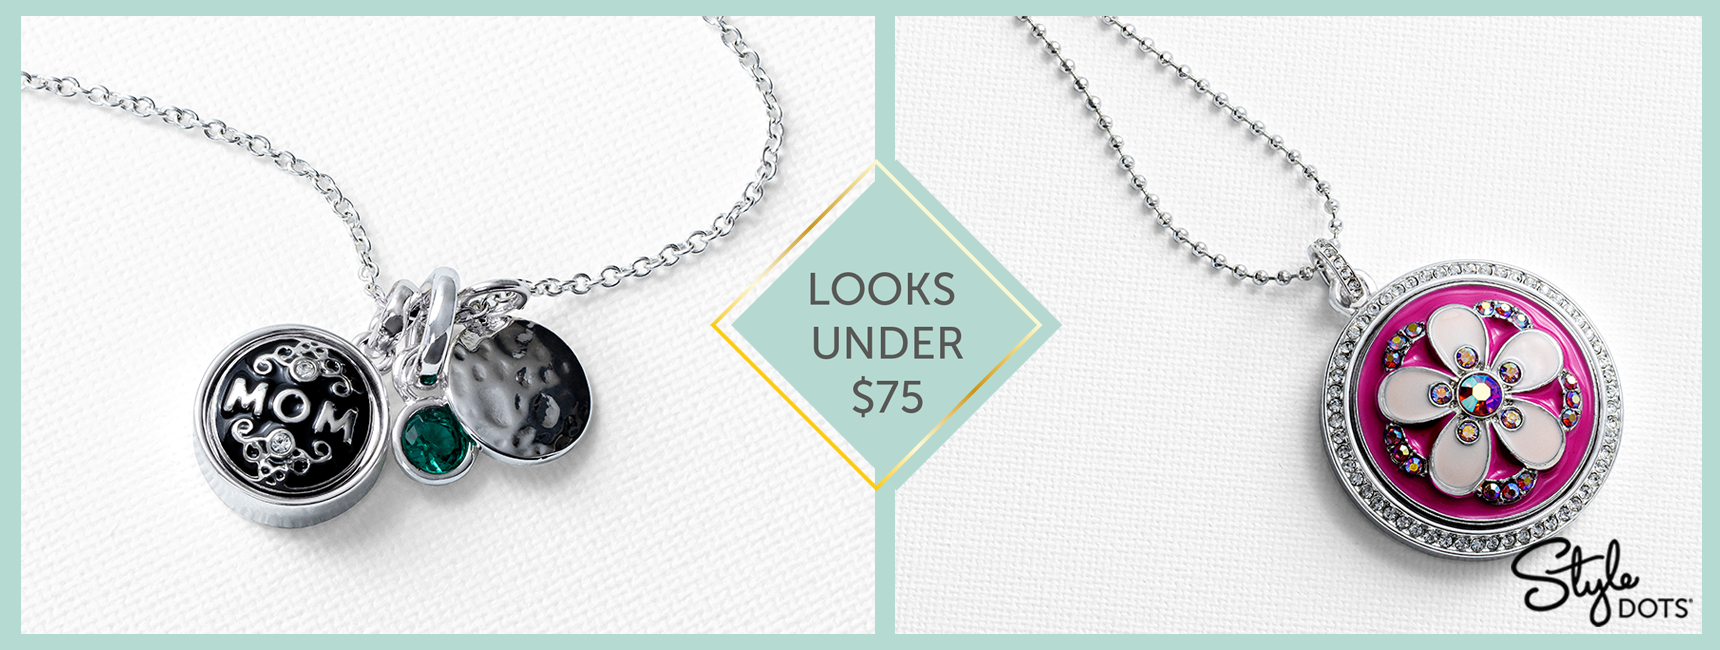 Necklaces, Dots and Charms create looks under seventy-five dollars